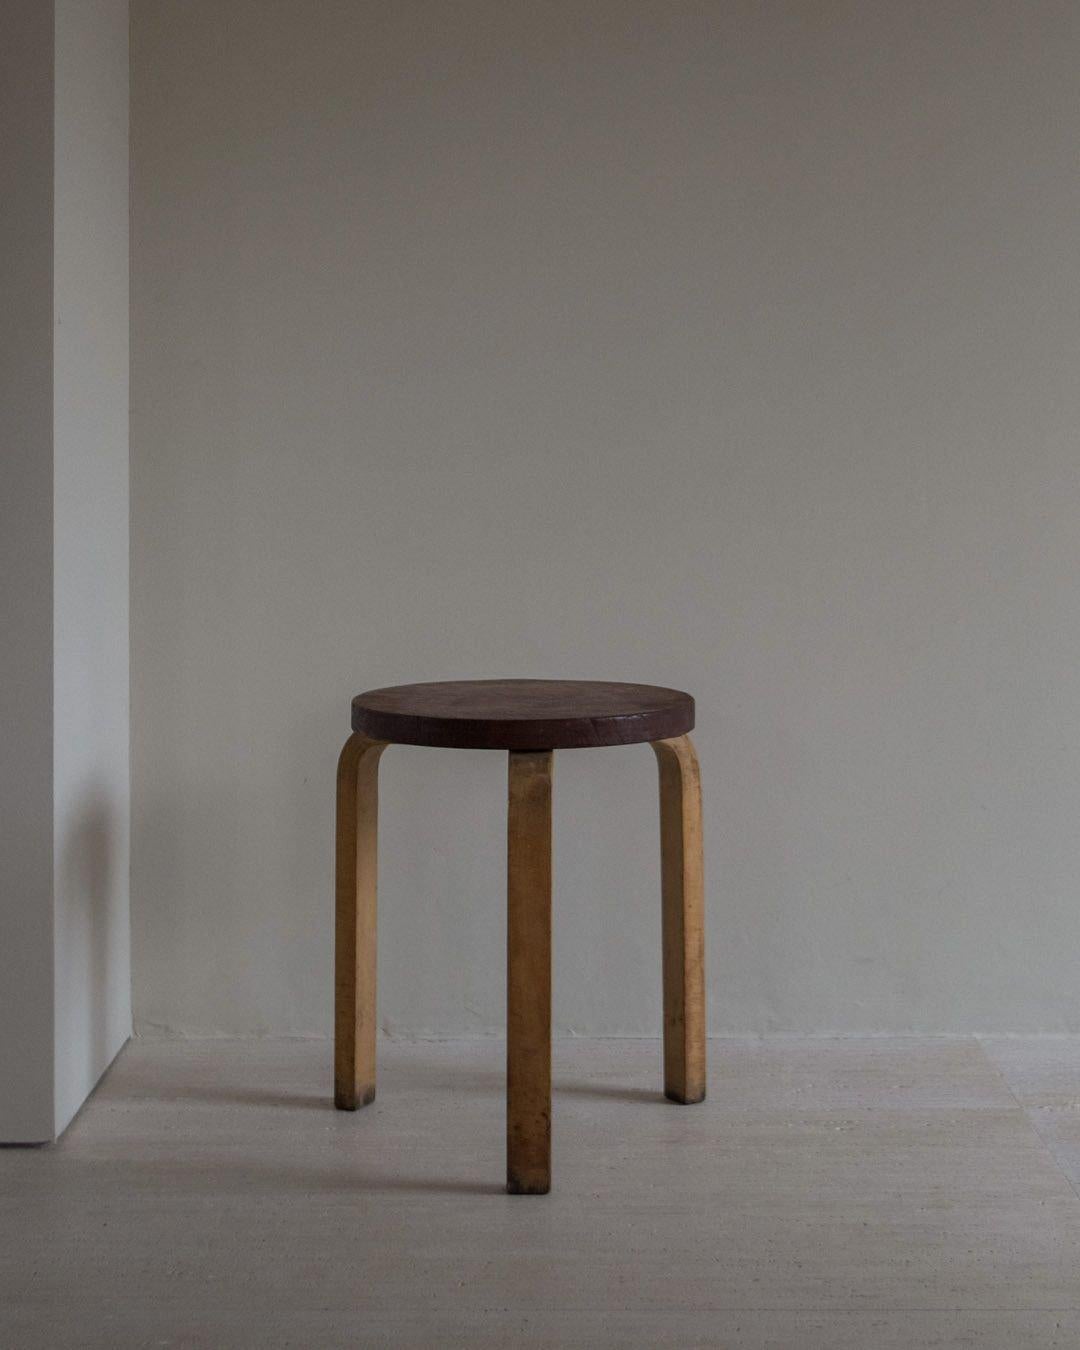 This two-tone tripod stool was designed by the Finnish designer Alvar Aalto (1898 - 1976) in the 30s and produced by Artek after 1960. They are composed of a round seat and 3 feet, all in Finnish birch. The particularity of this stool is carried by